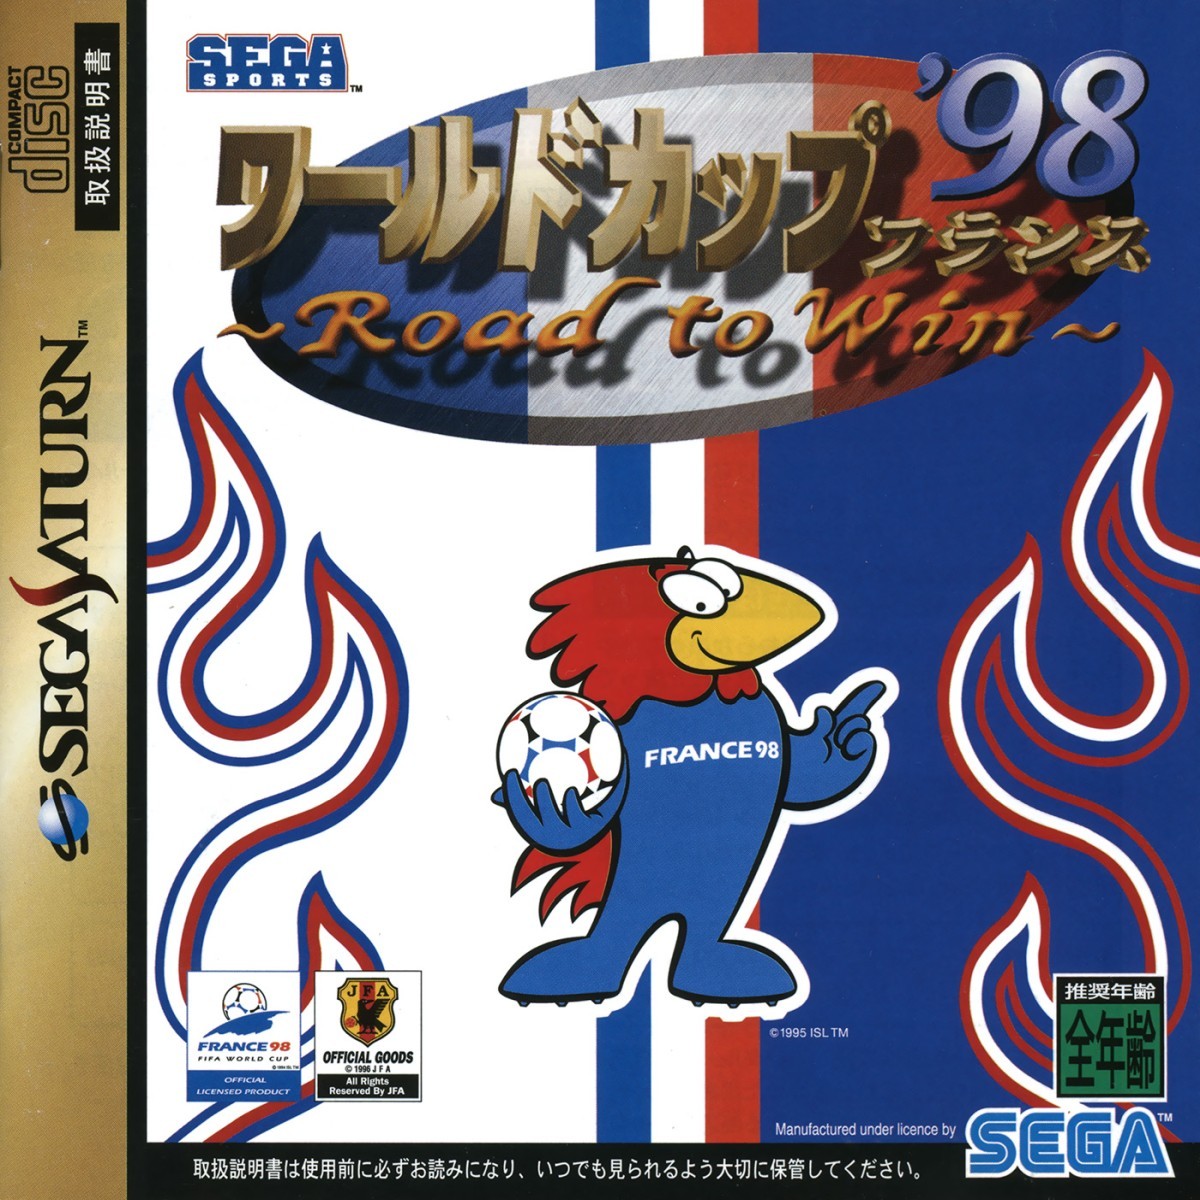 Capa do jogo World Cup 98 France: Road to Win